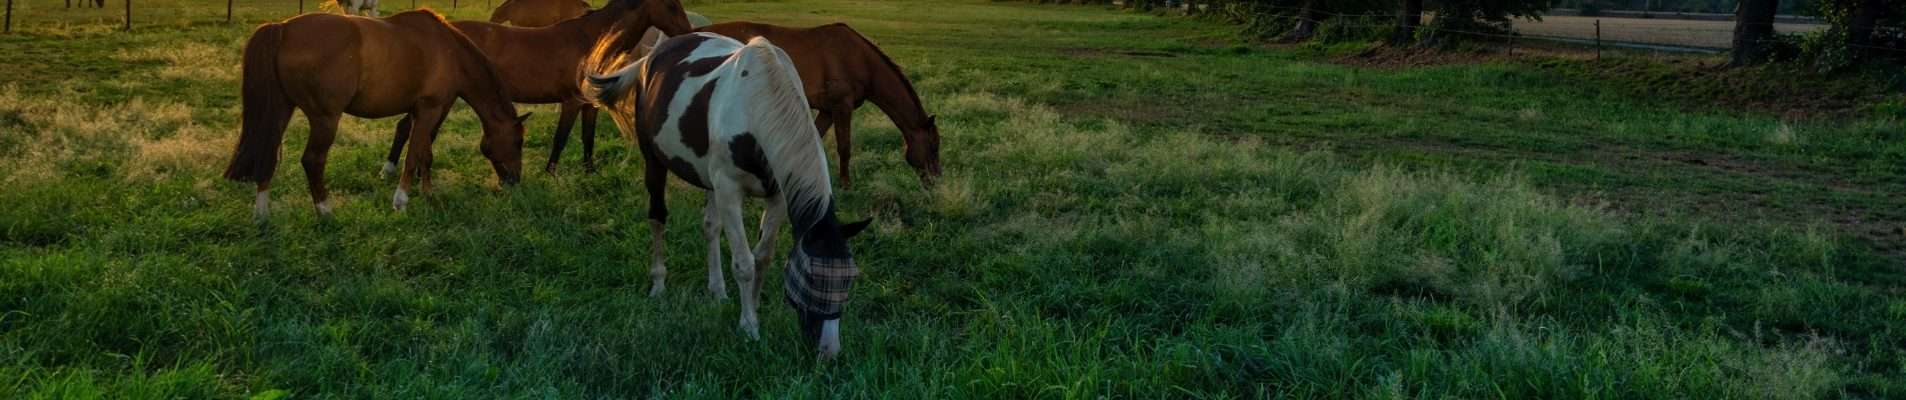 5 top sunscreens for horses